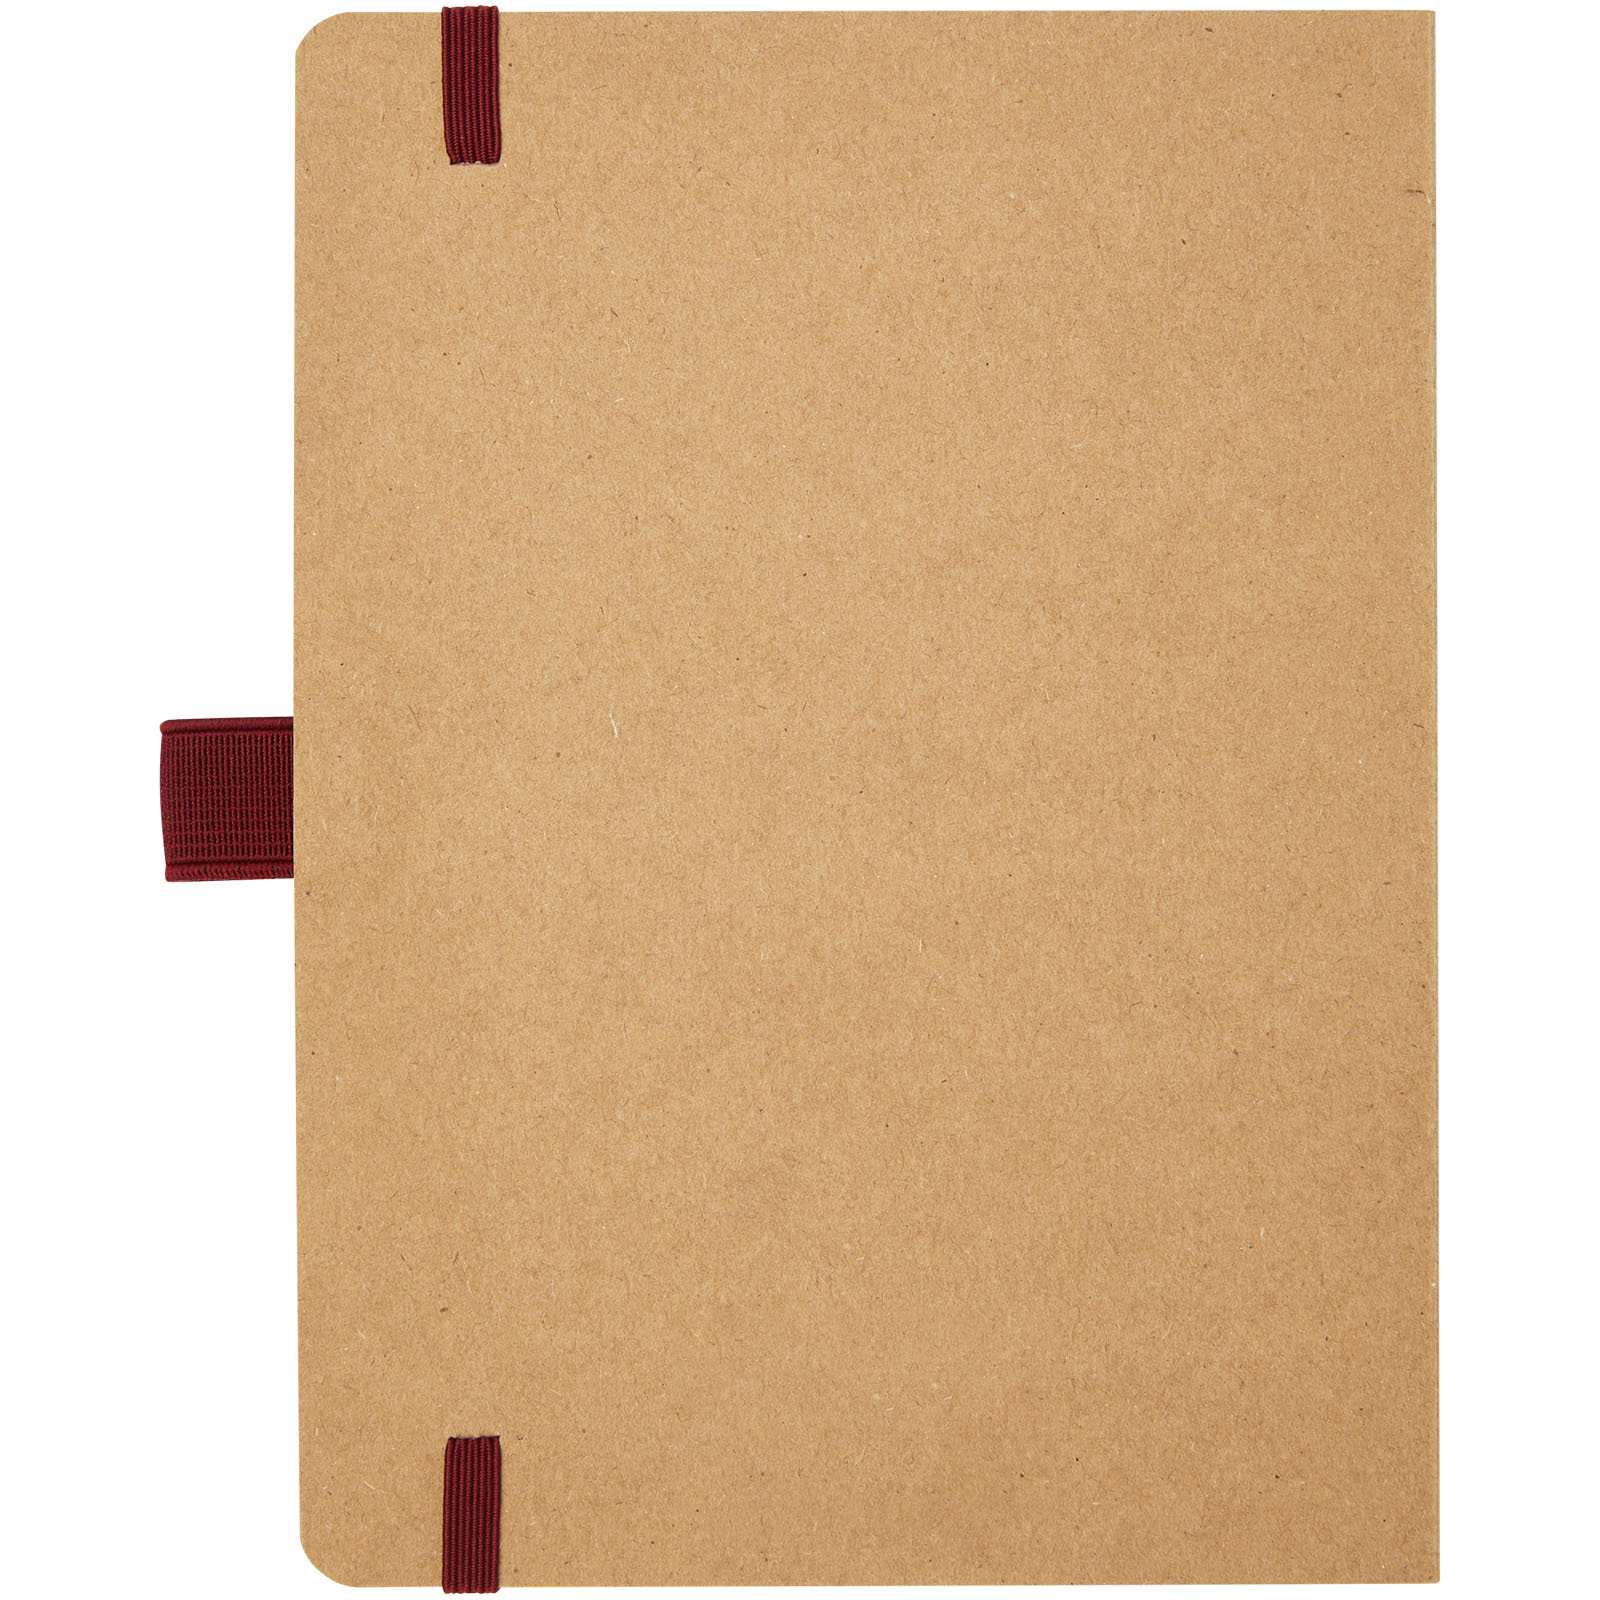 Advertising Soft cover notebooks - Berk recycled paper notebook - 2